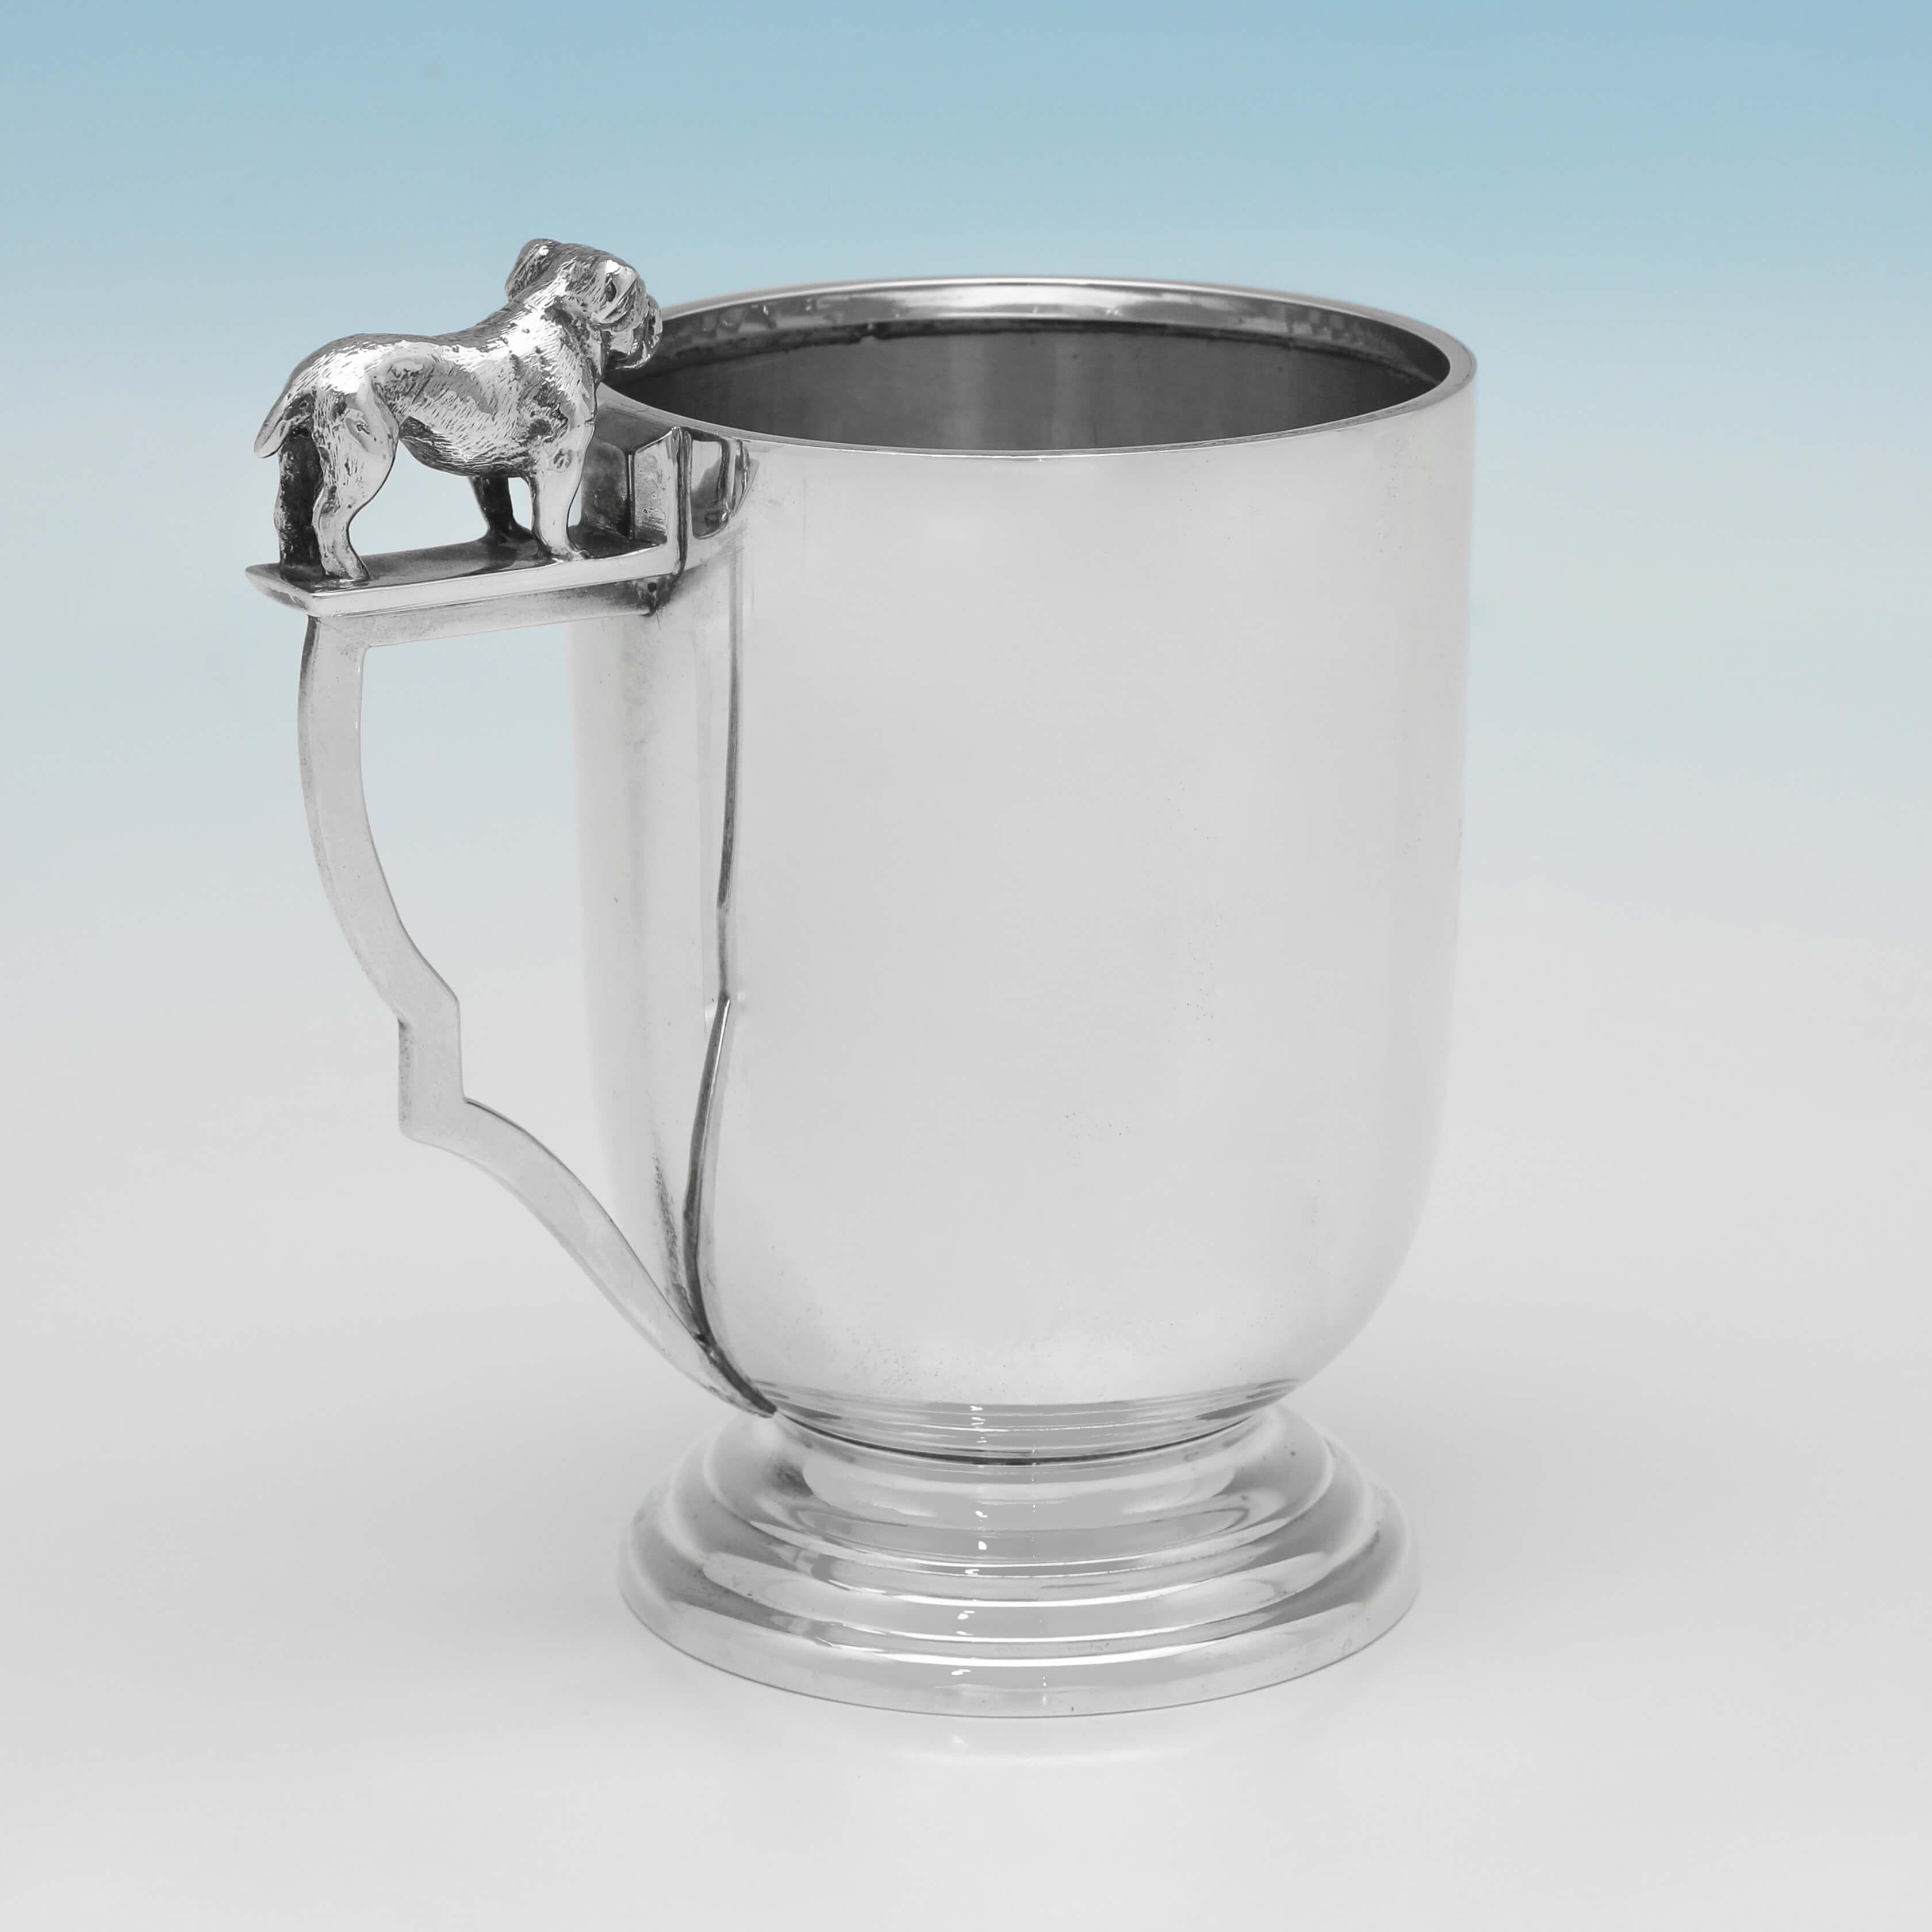 Hallmarked in Birmingham in 1937 by Sanders & Mackenzie, this handsome, Sterling Silver Christening Mug, is plain in design, and features a cast model of a bull dog on the handle. The Christening mug measures 4.25